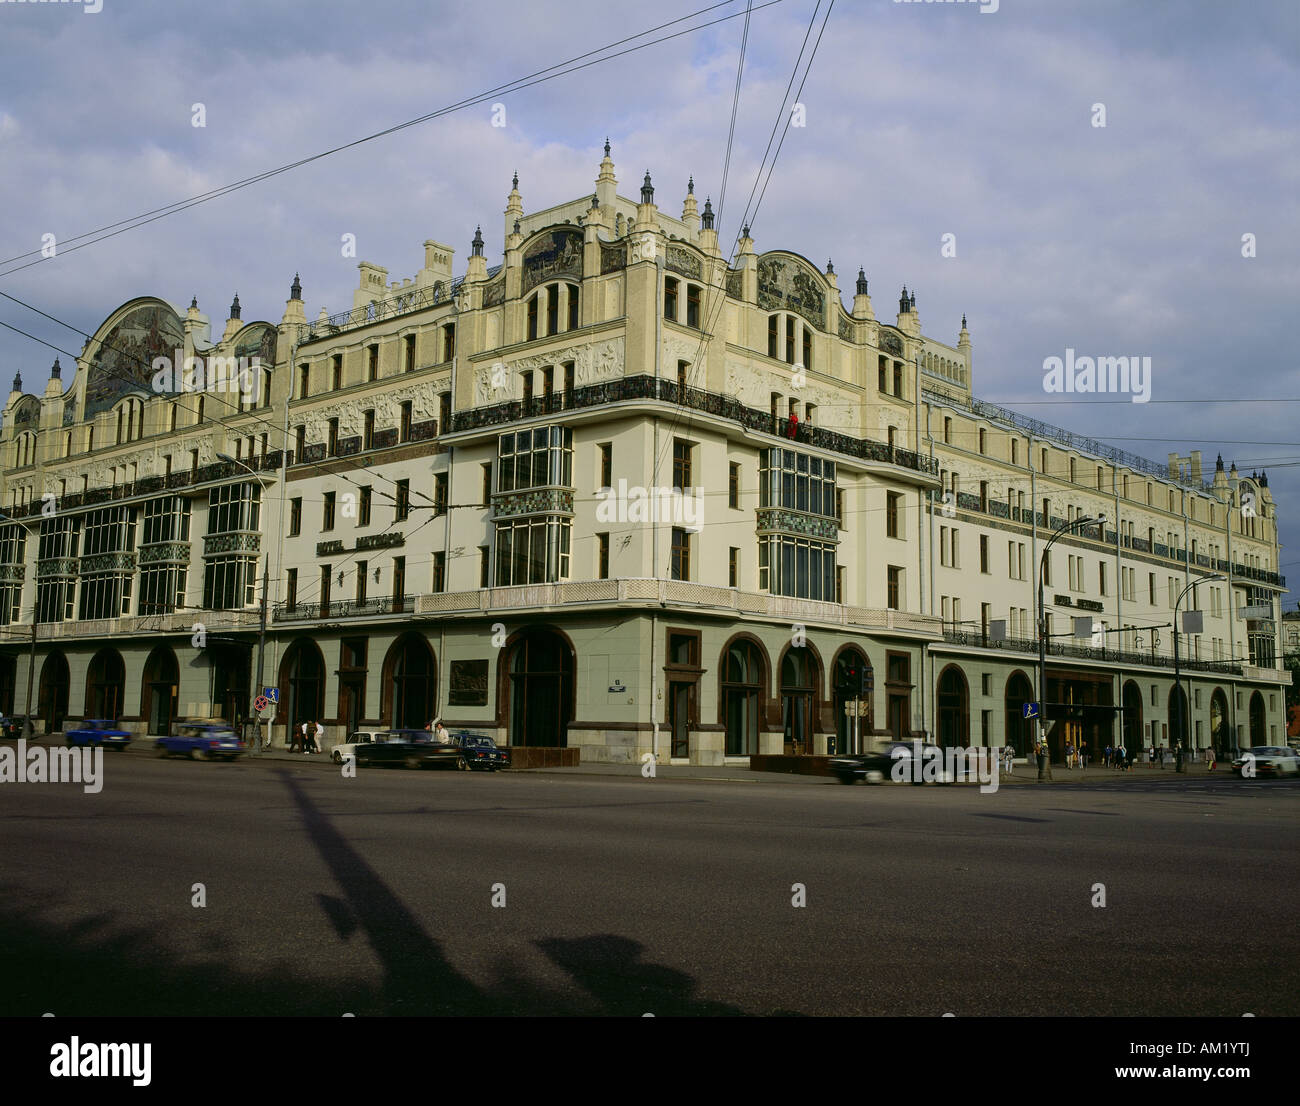 geography / travel, Russia, Moscow, Metropol Hotel, exterior view, Art Nouveau, facade, Stock Photo